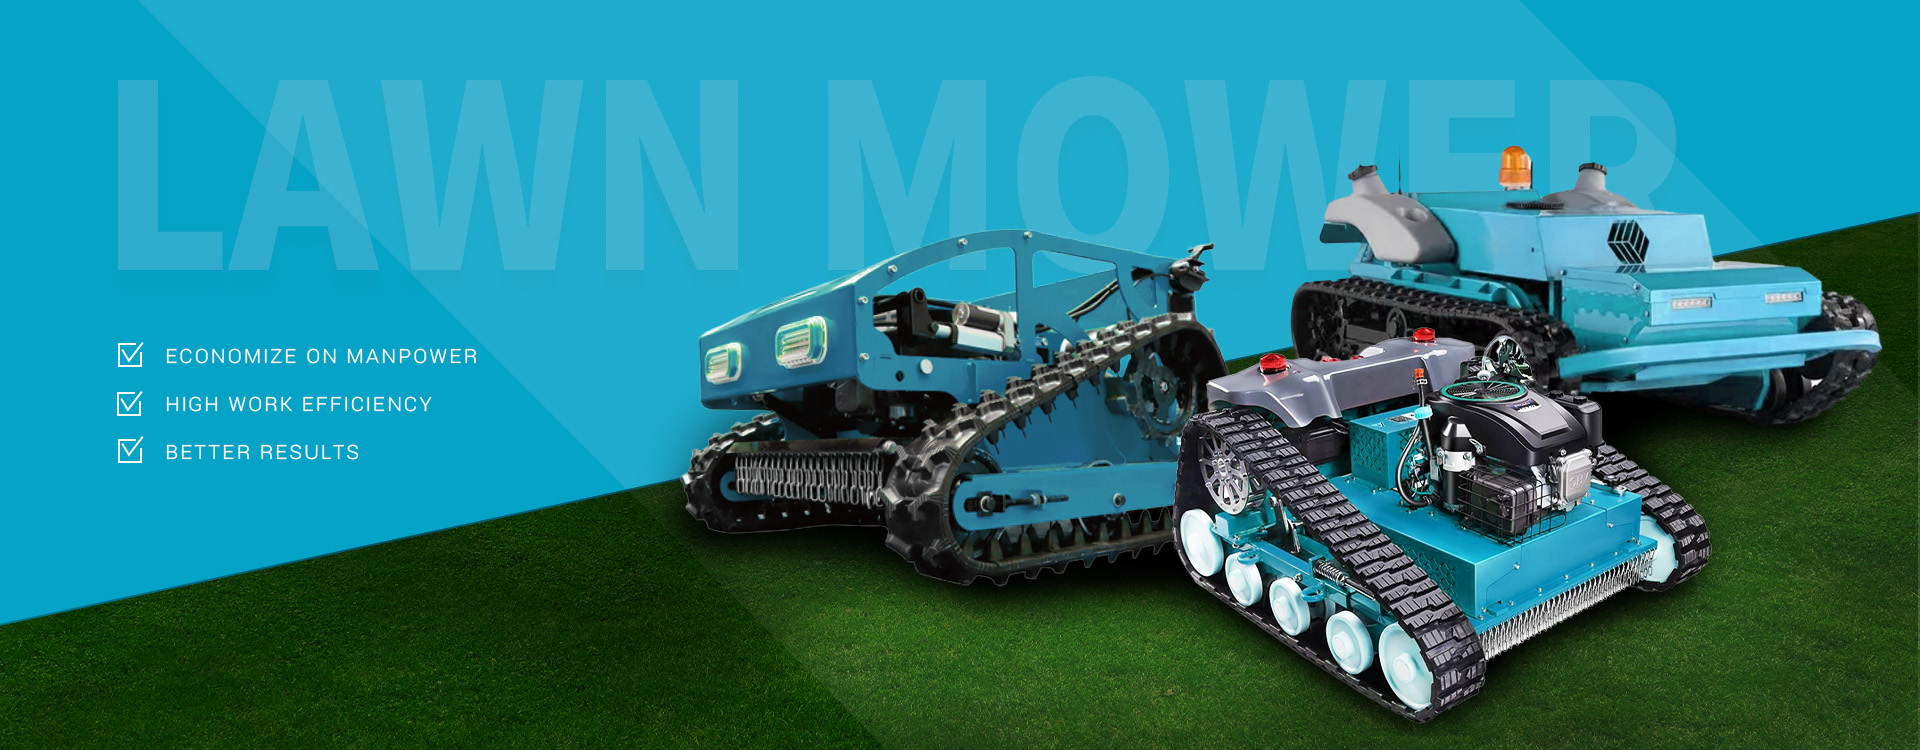 Remote-Controlled Lawn Mower